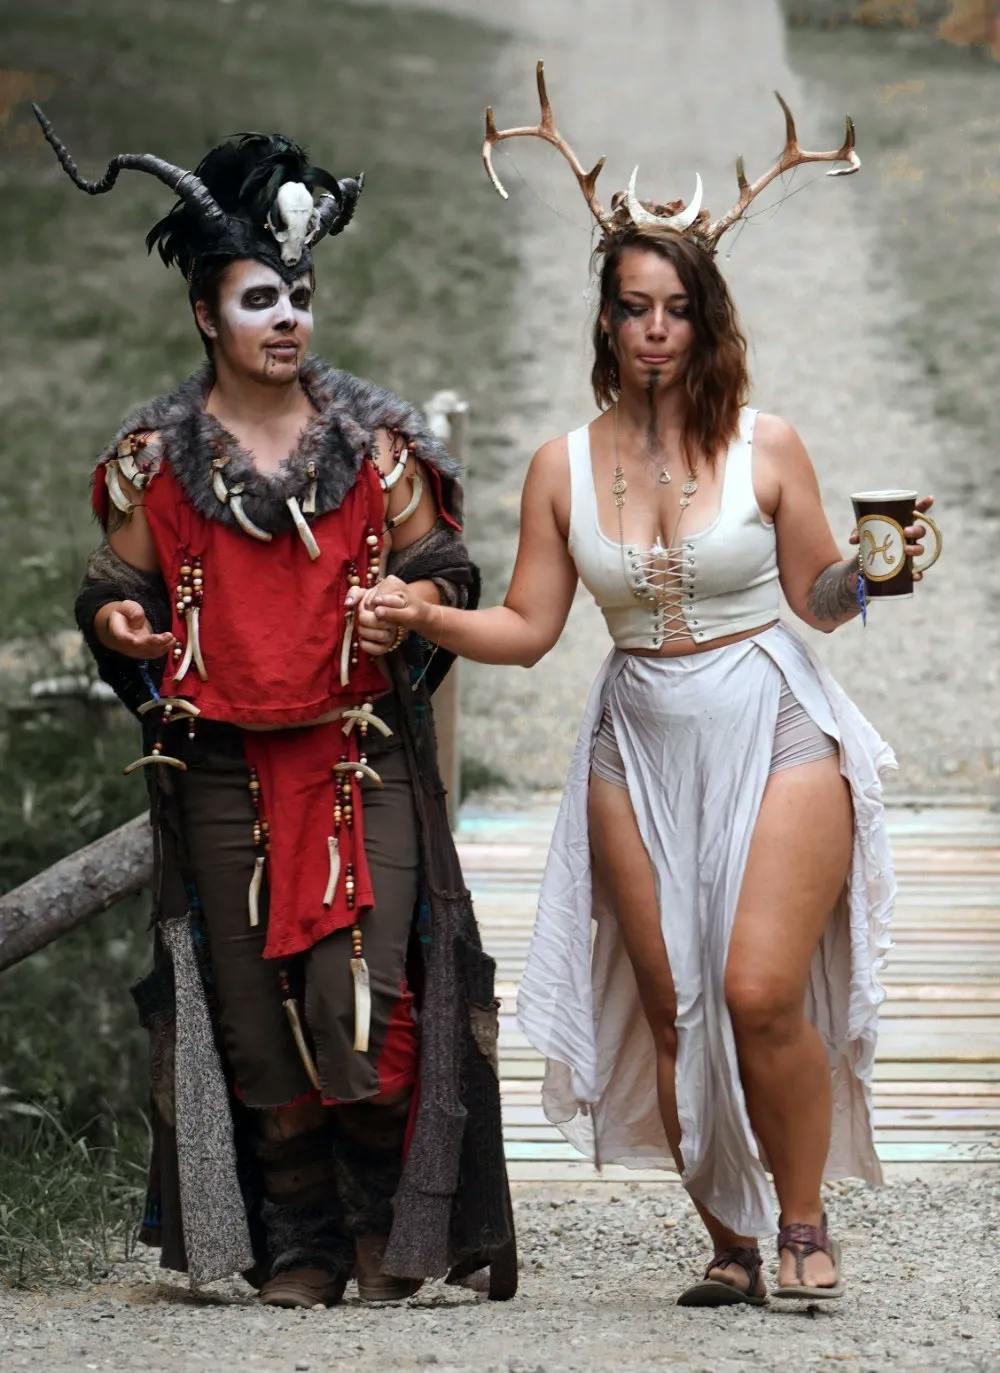 Two festival participants in elaborate costumes, one with a deer skull headdress.